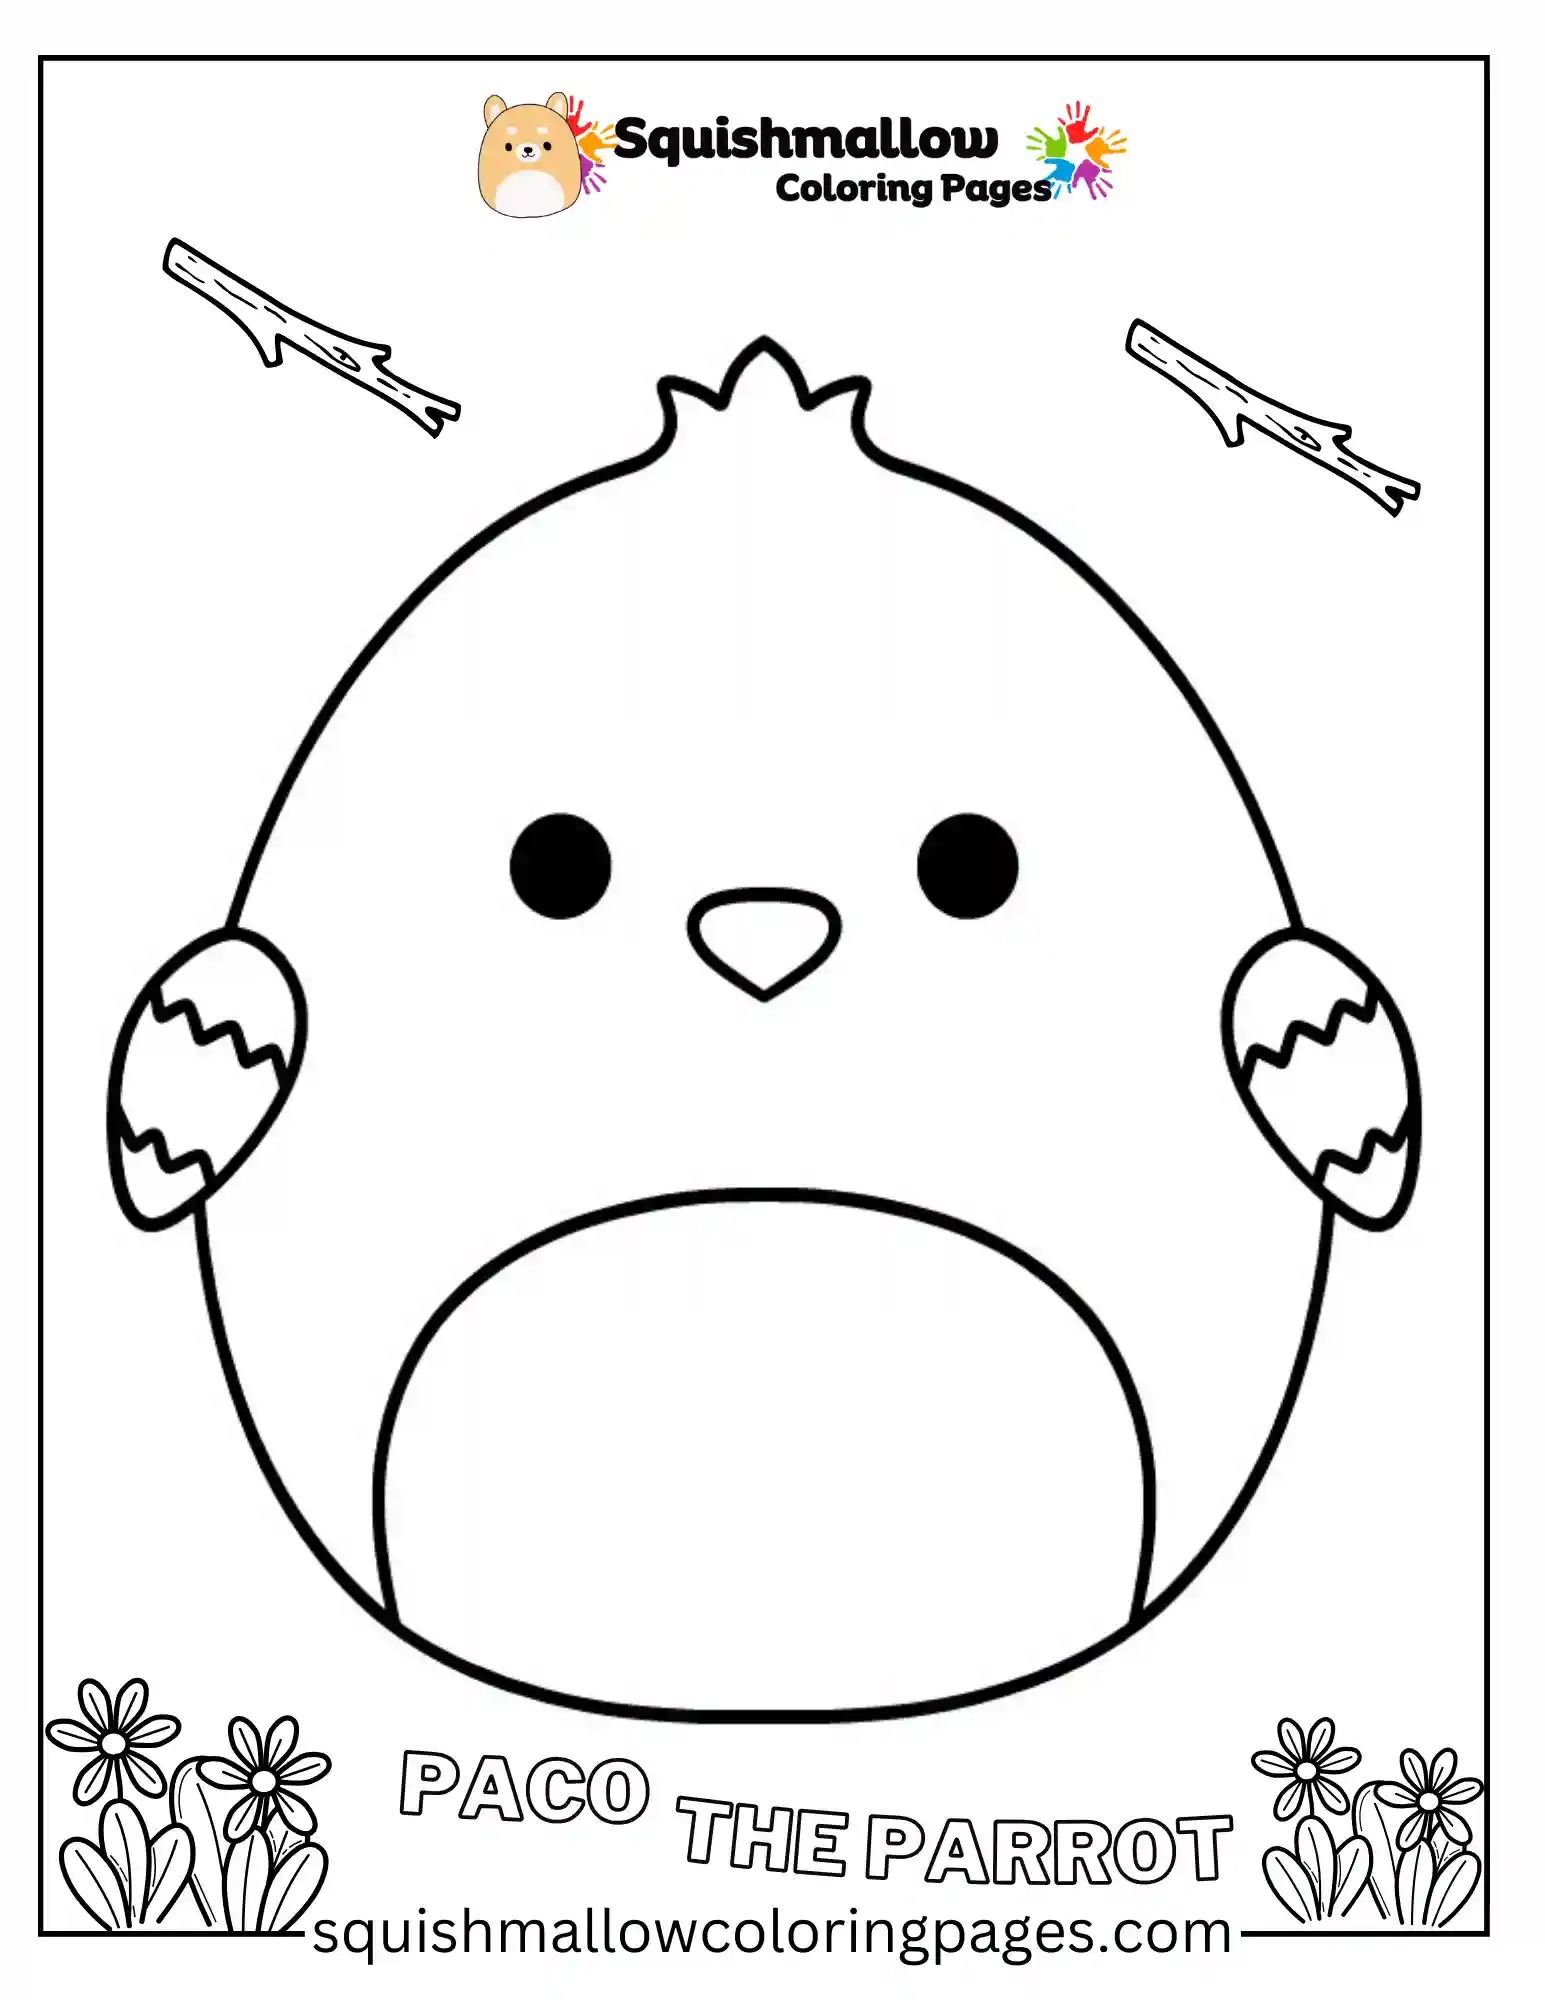 Paco The Parrot Squishmallow Coloring Page